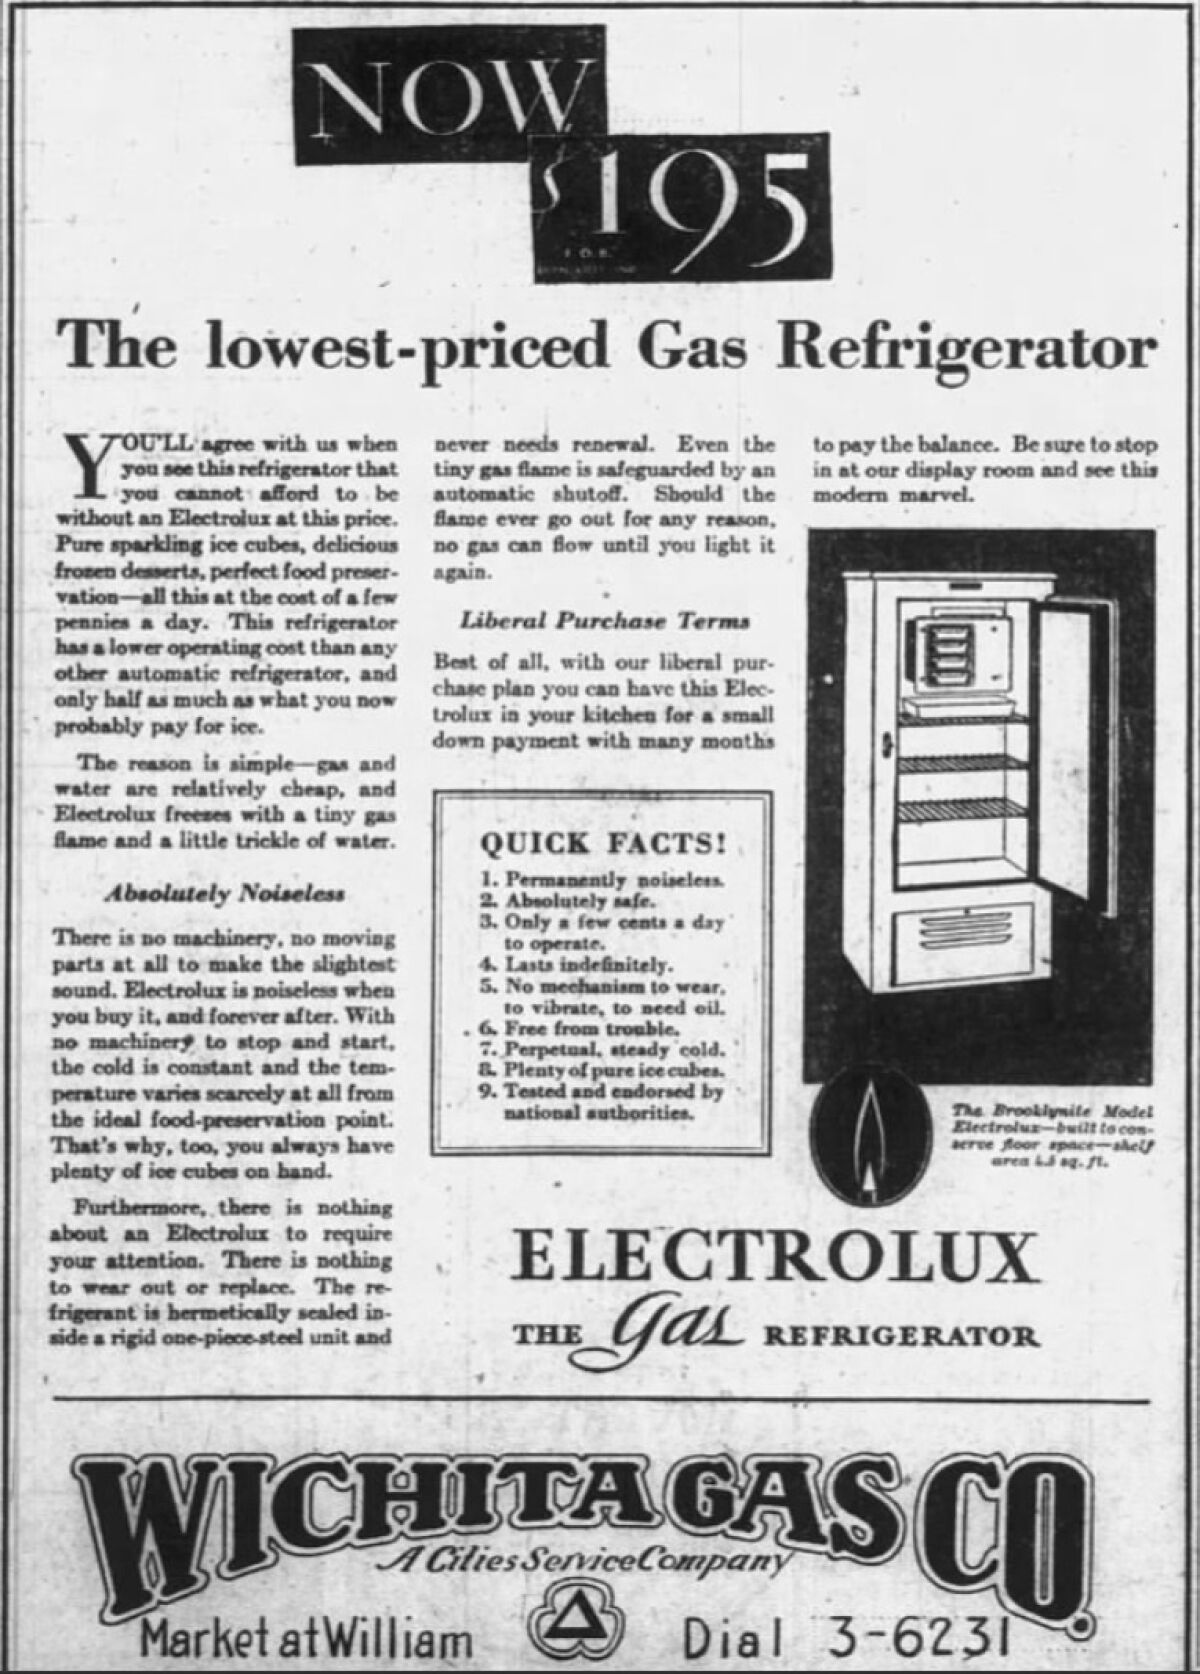 A 1930 newspaper advertisement for an Electrolux gas refrigerator offered for $195.